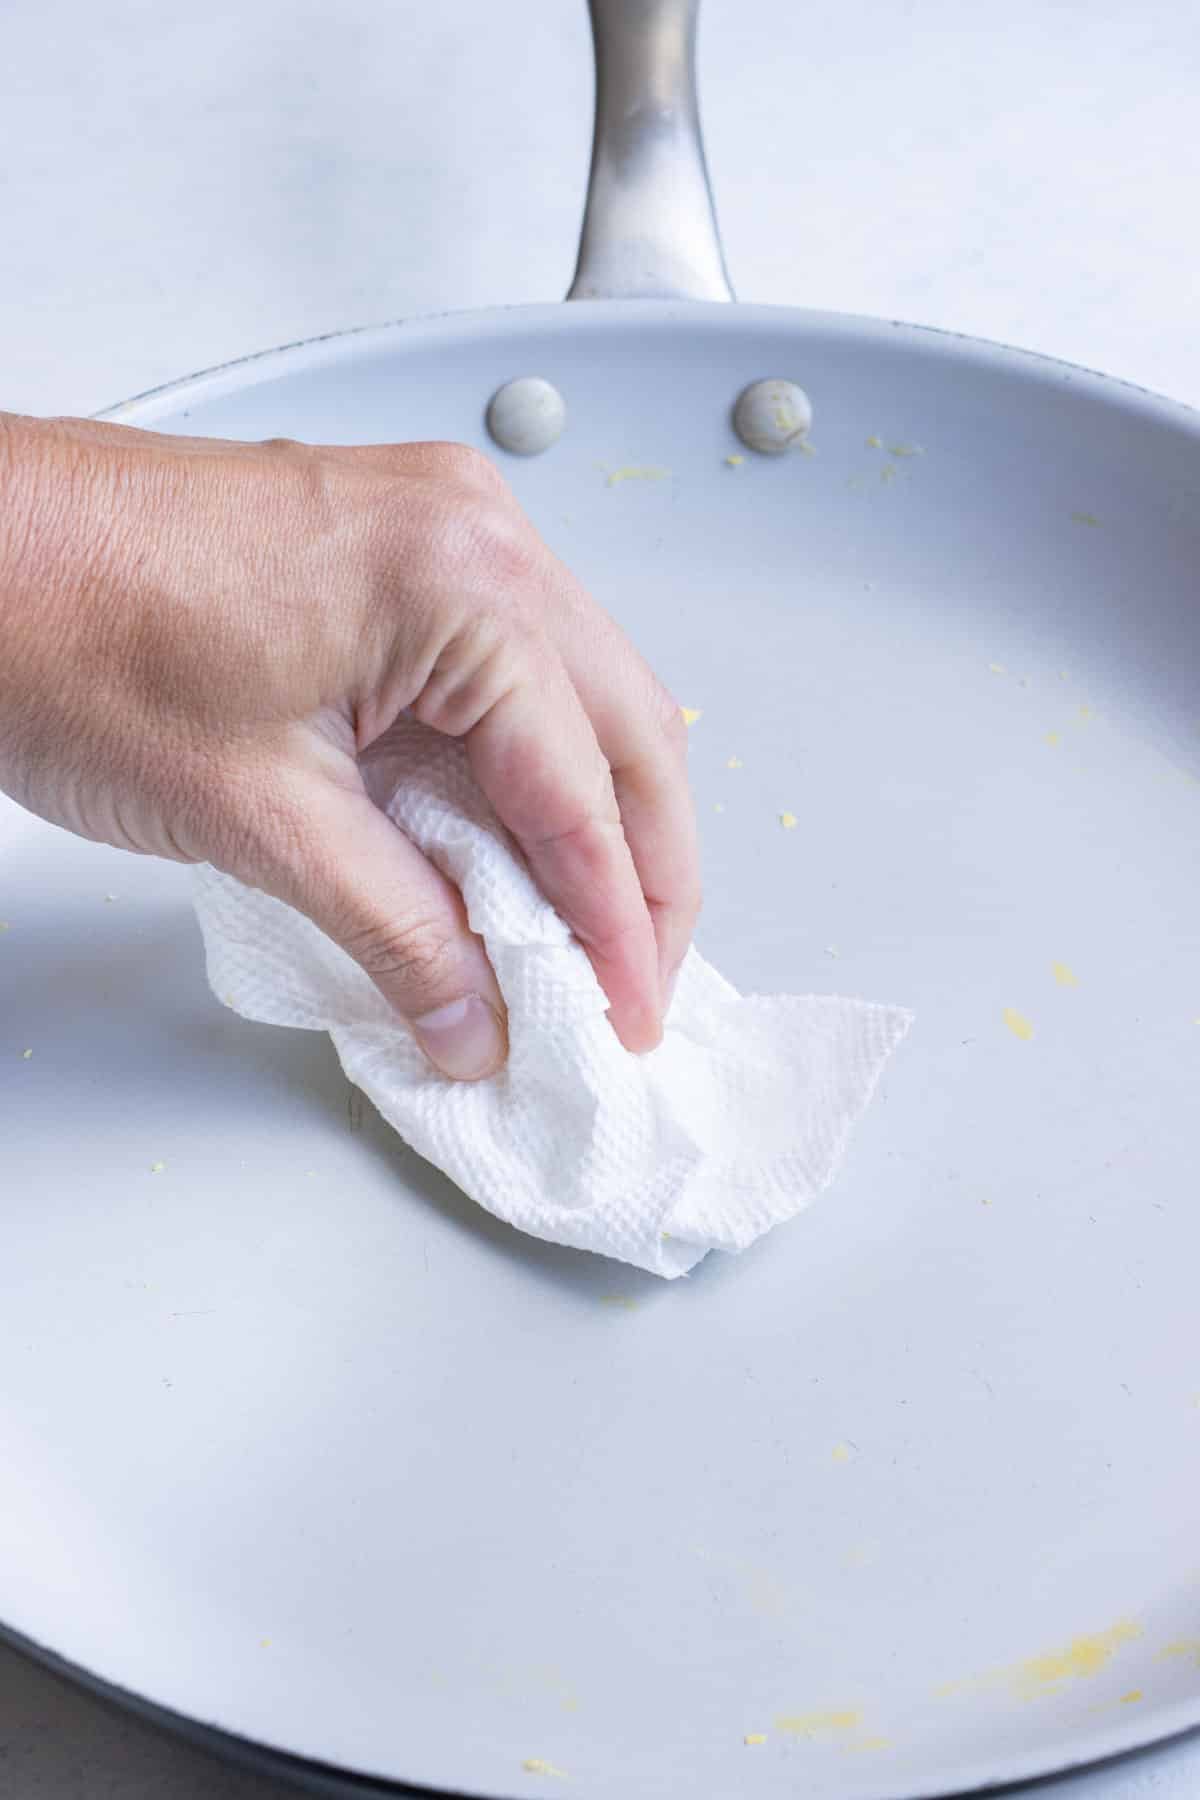 A hand wipes down the skillet after scrambling eggs.